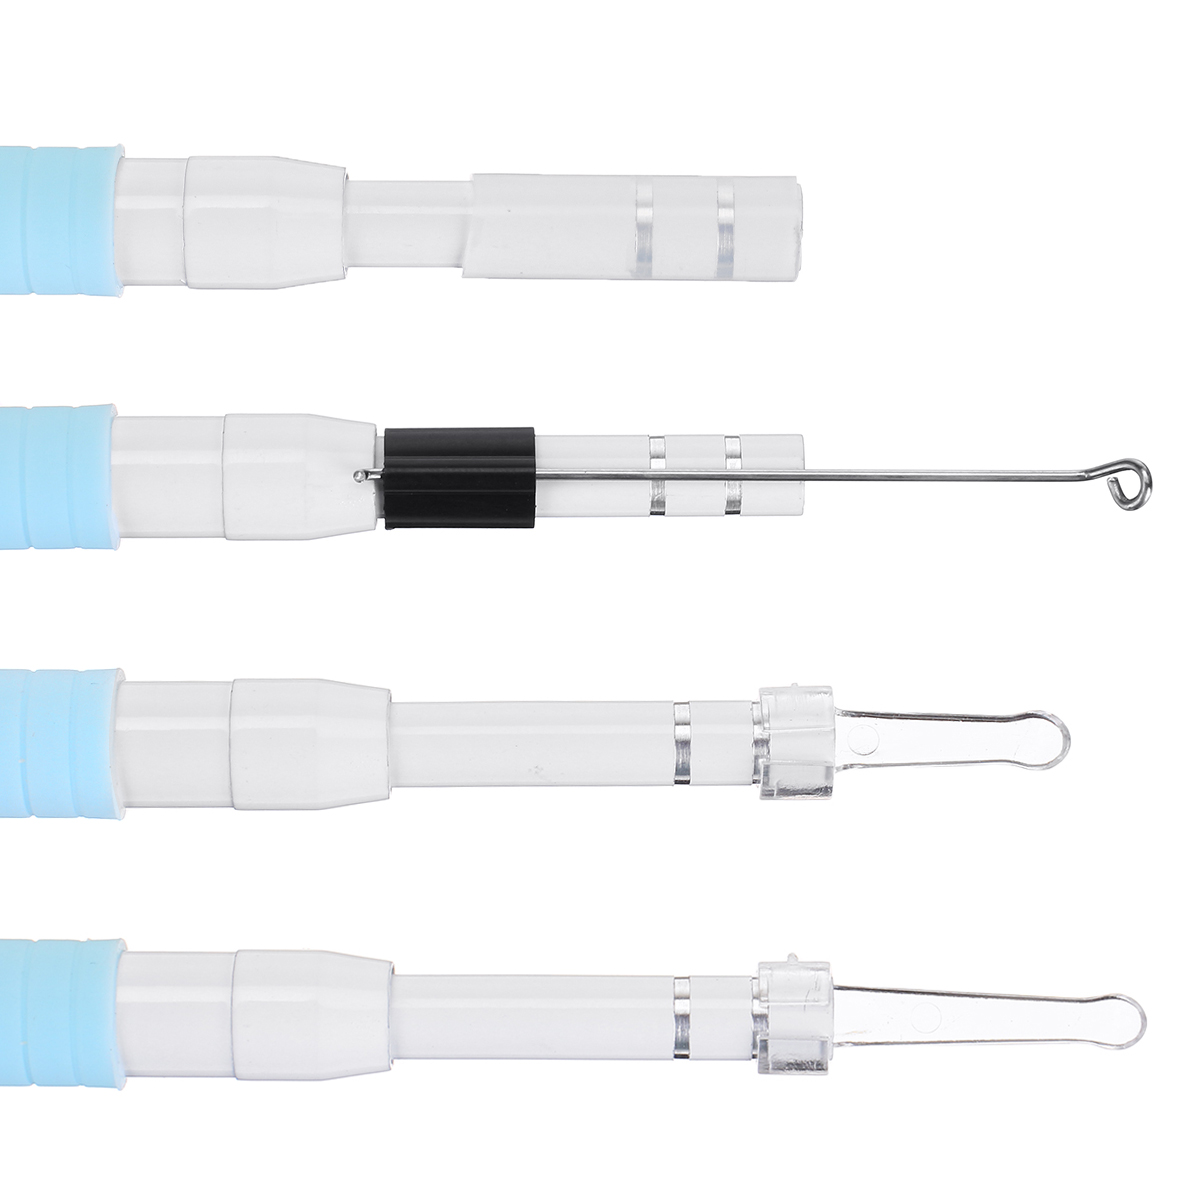 Find 3 in 1 480P 5 5MM Luminous Visual Ear Scoop Endoscope Set IP67 Waterproof LED Lighting Ear Spoon Ear Wax Removal Curette Pick Ear Cleaner for Sale on Gipsybee.com with cryptocurrencies